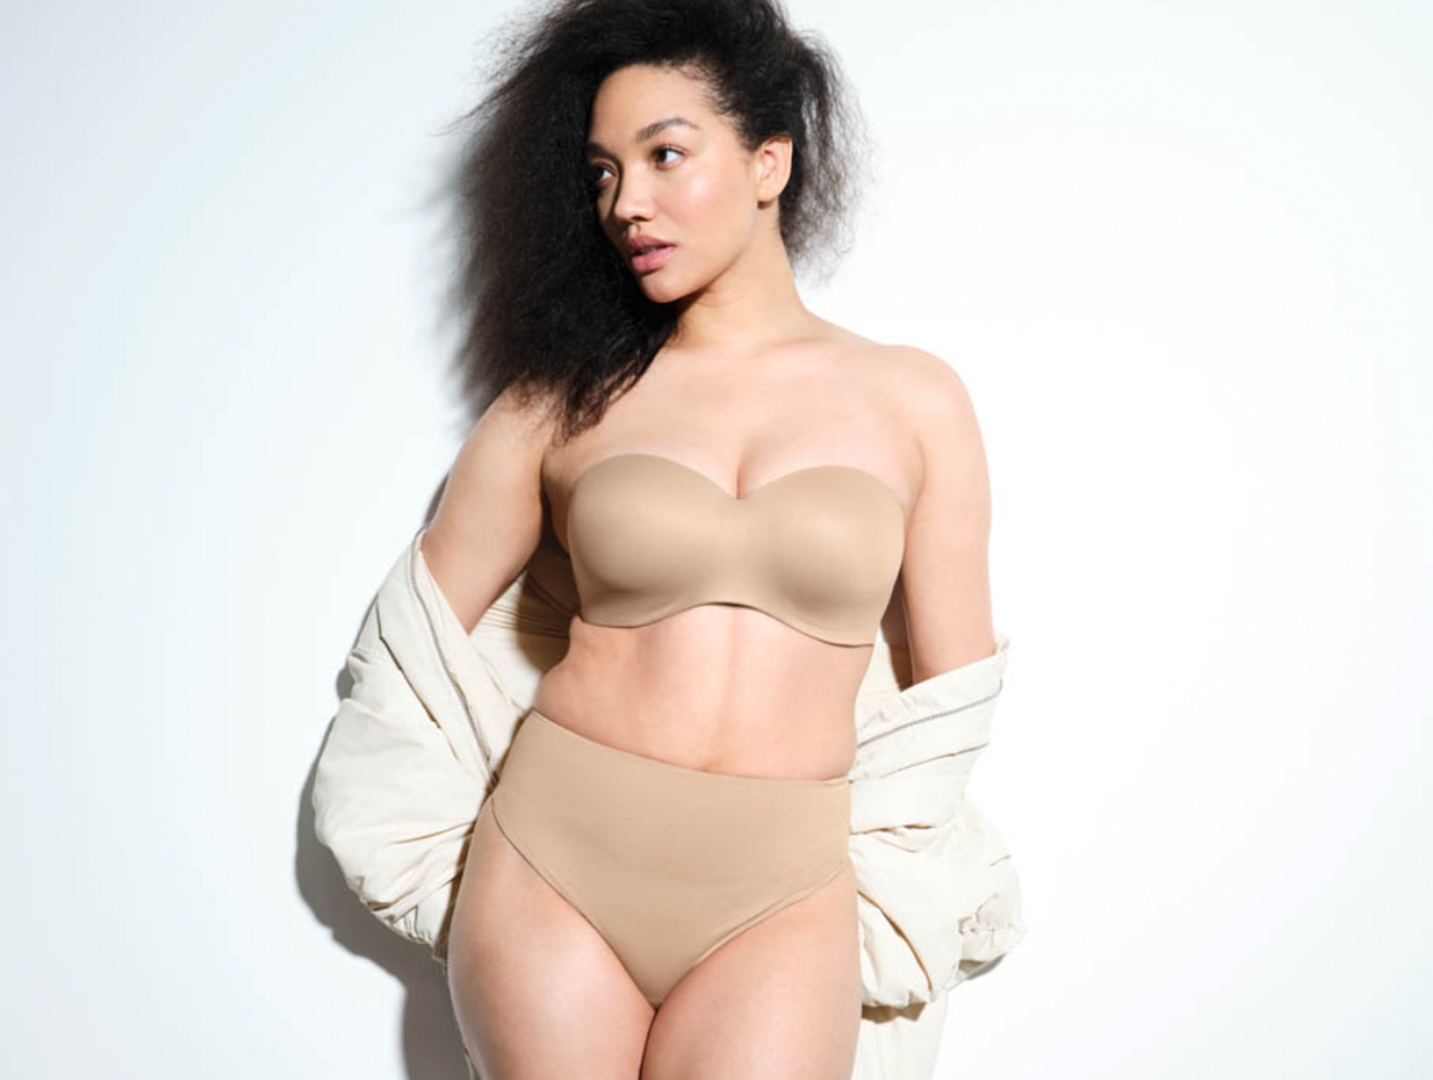 10 Most Asked Questions On Shapewear Answered - ForSheHer